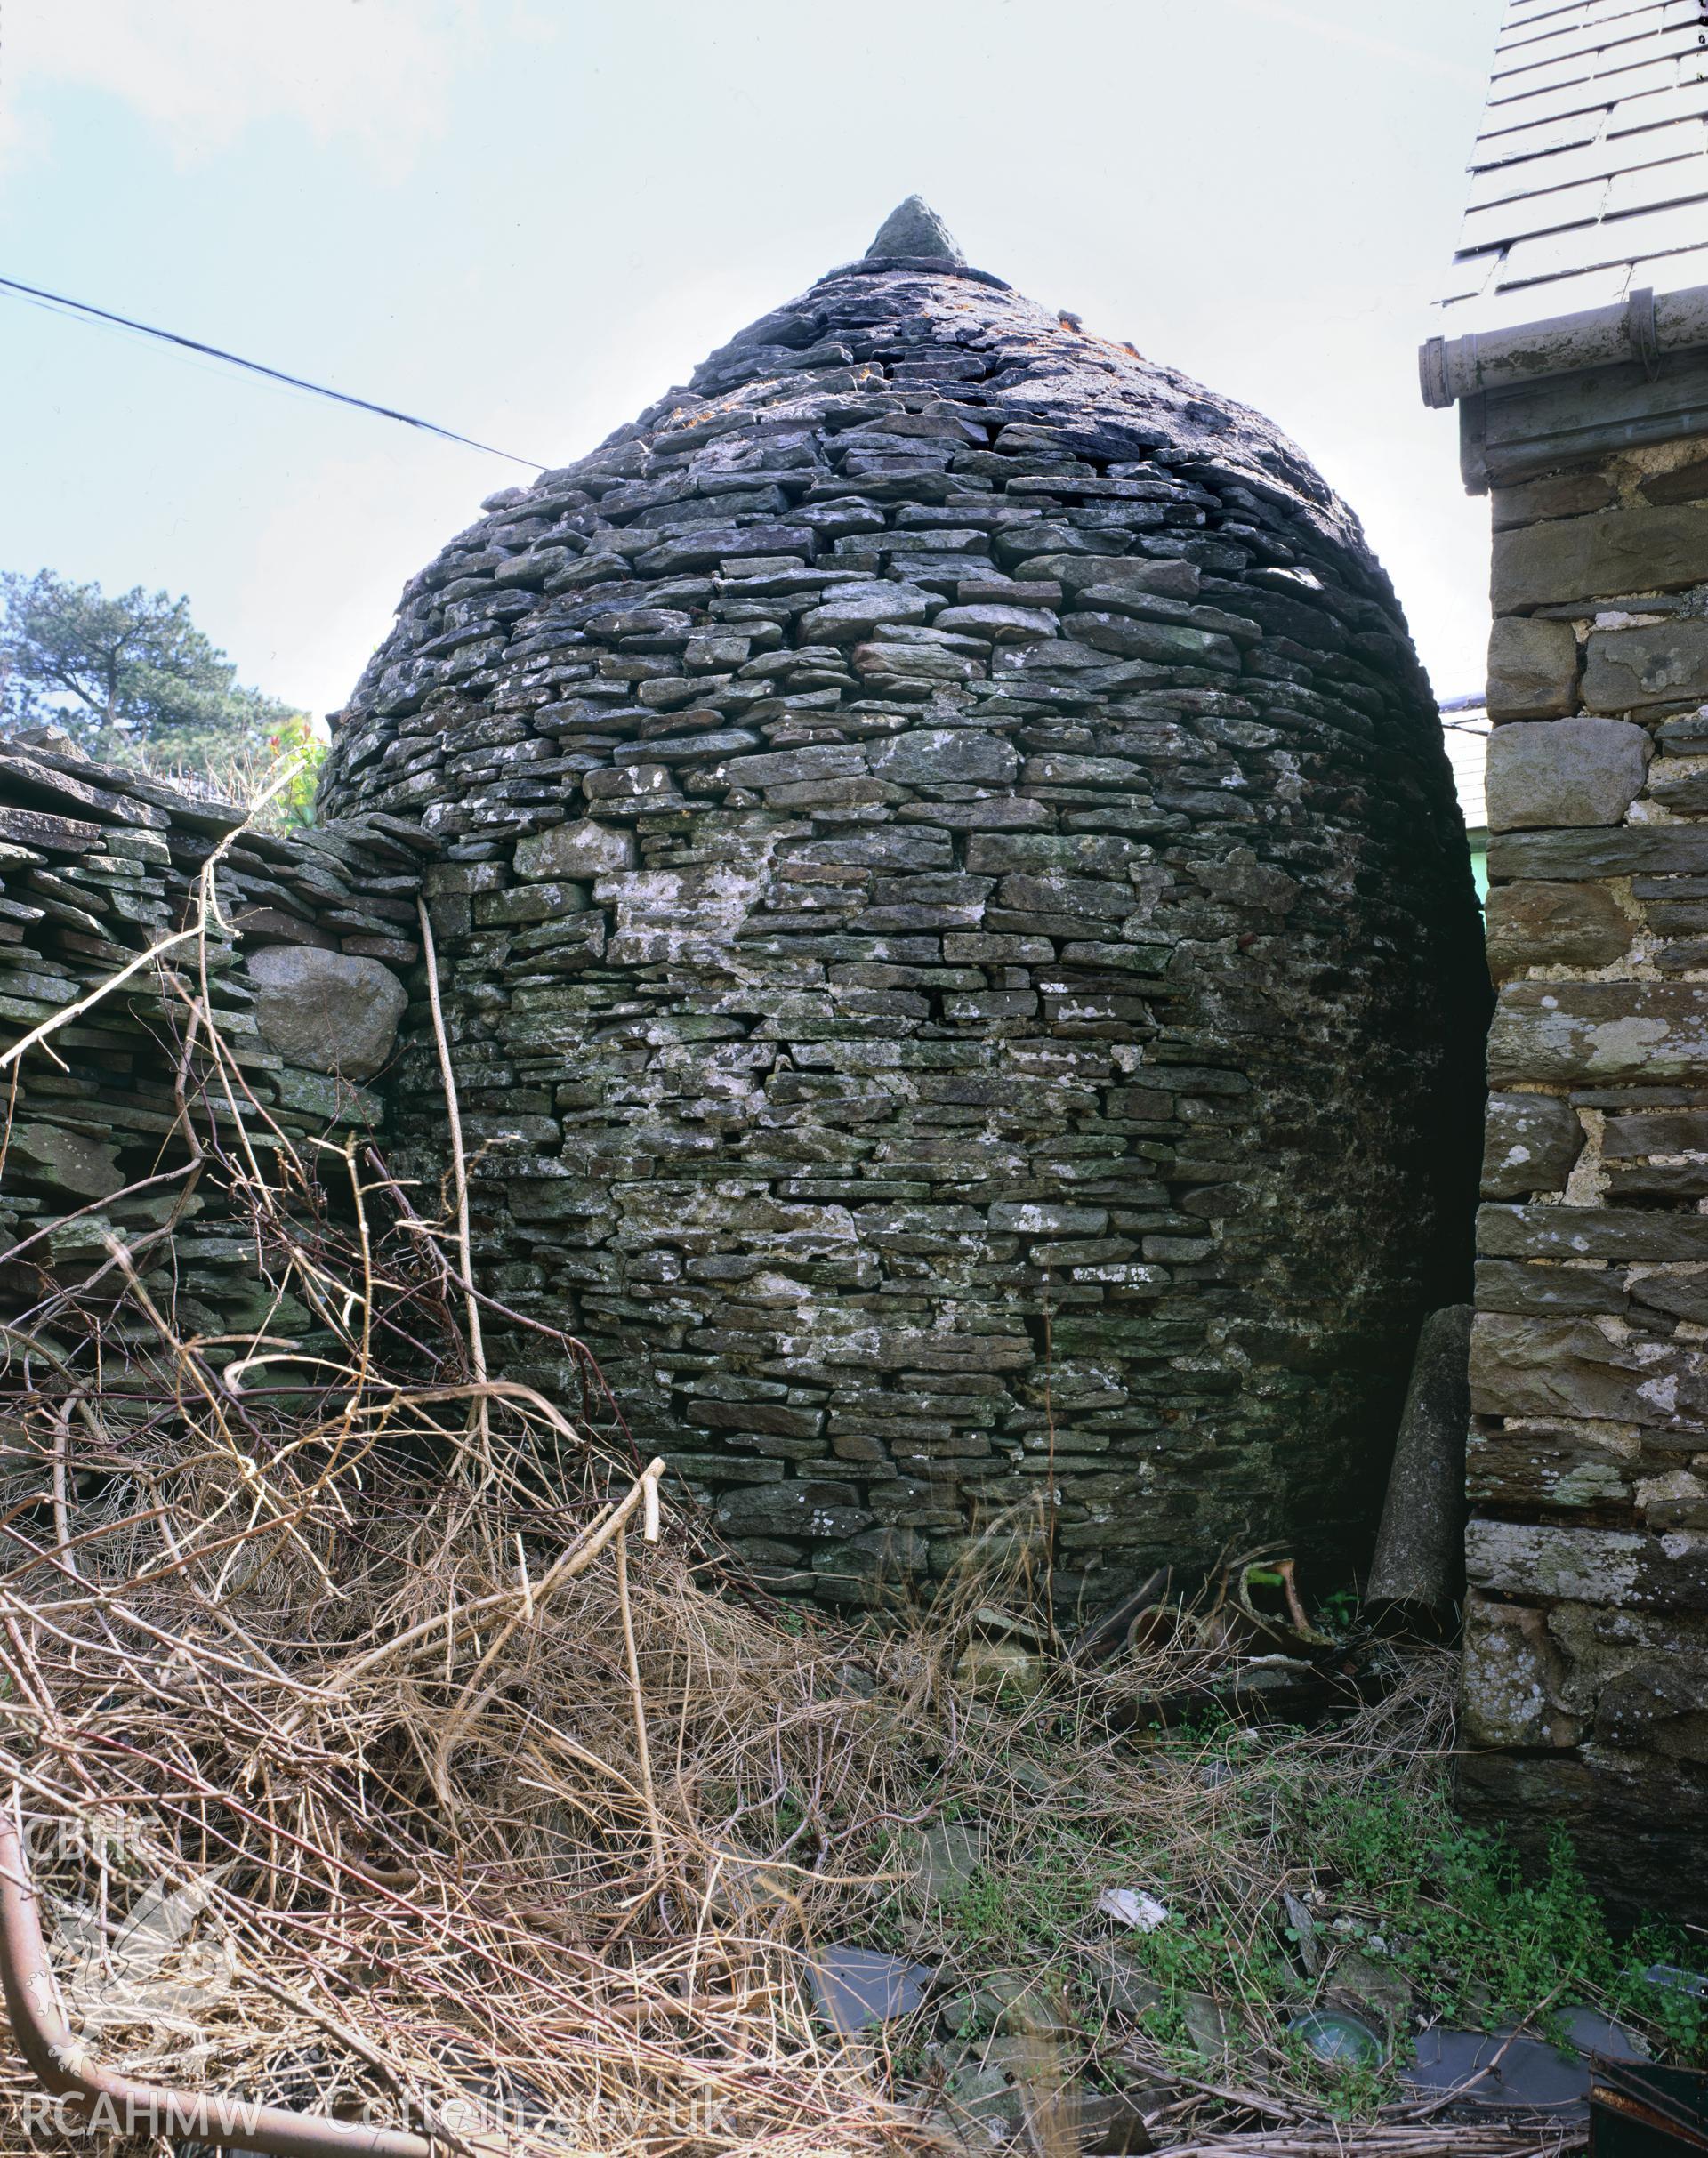 Colour transparency showing a view of Pencaedrain Pigsty, Bargoed produced by Iain Wright, May 2003